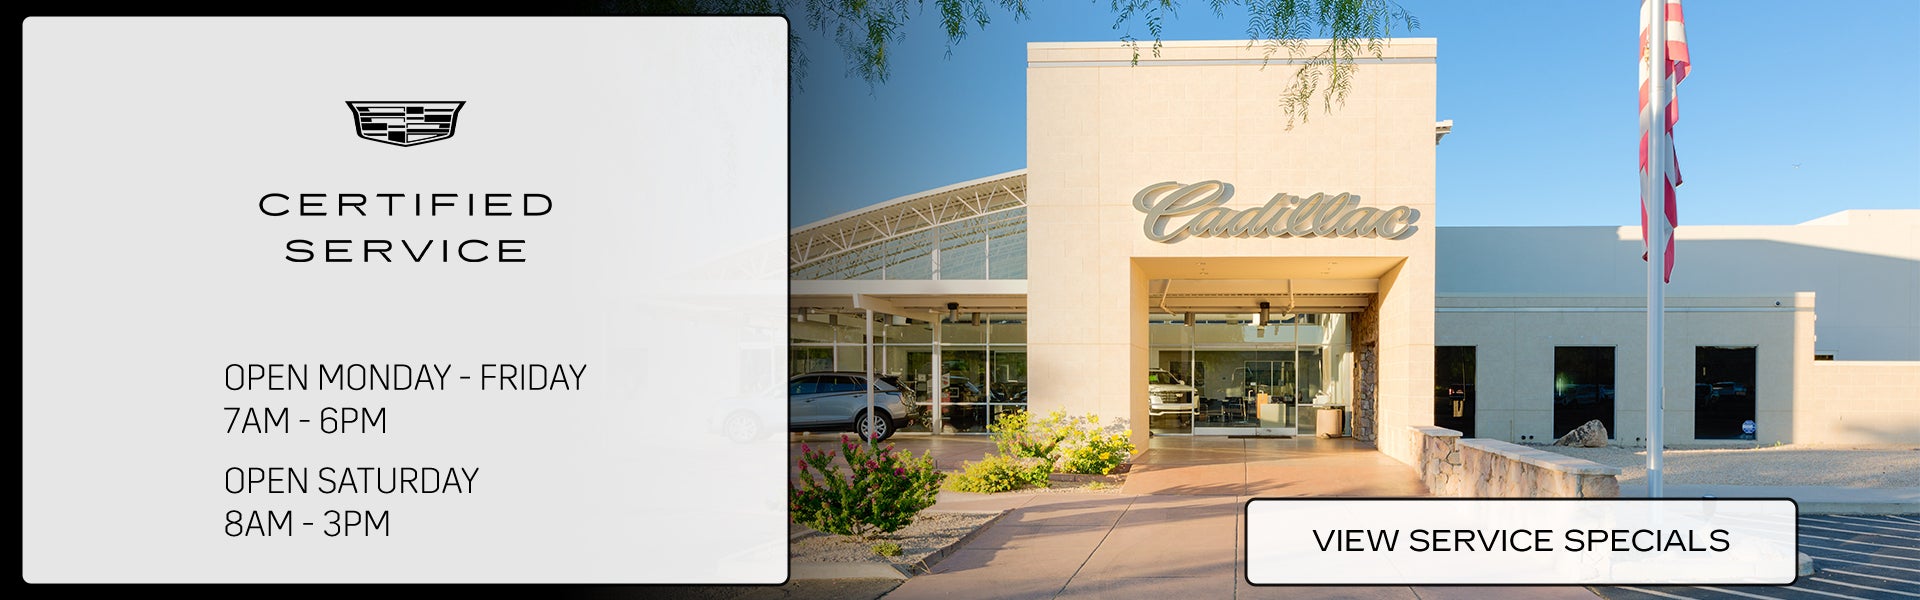 Certified Service at Earnhardt Cadillac in Scottsdale